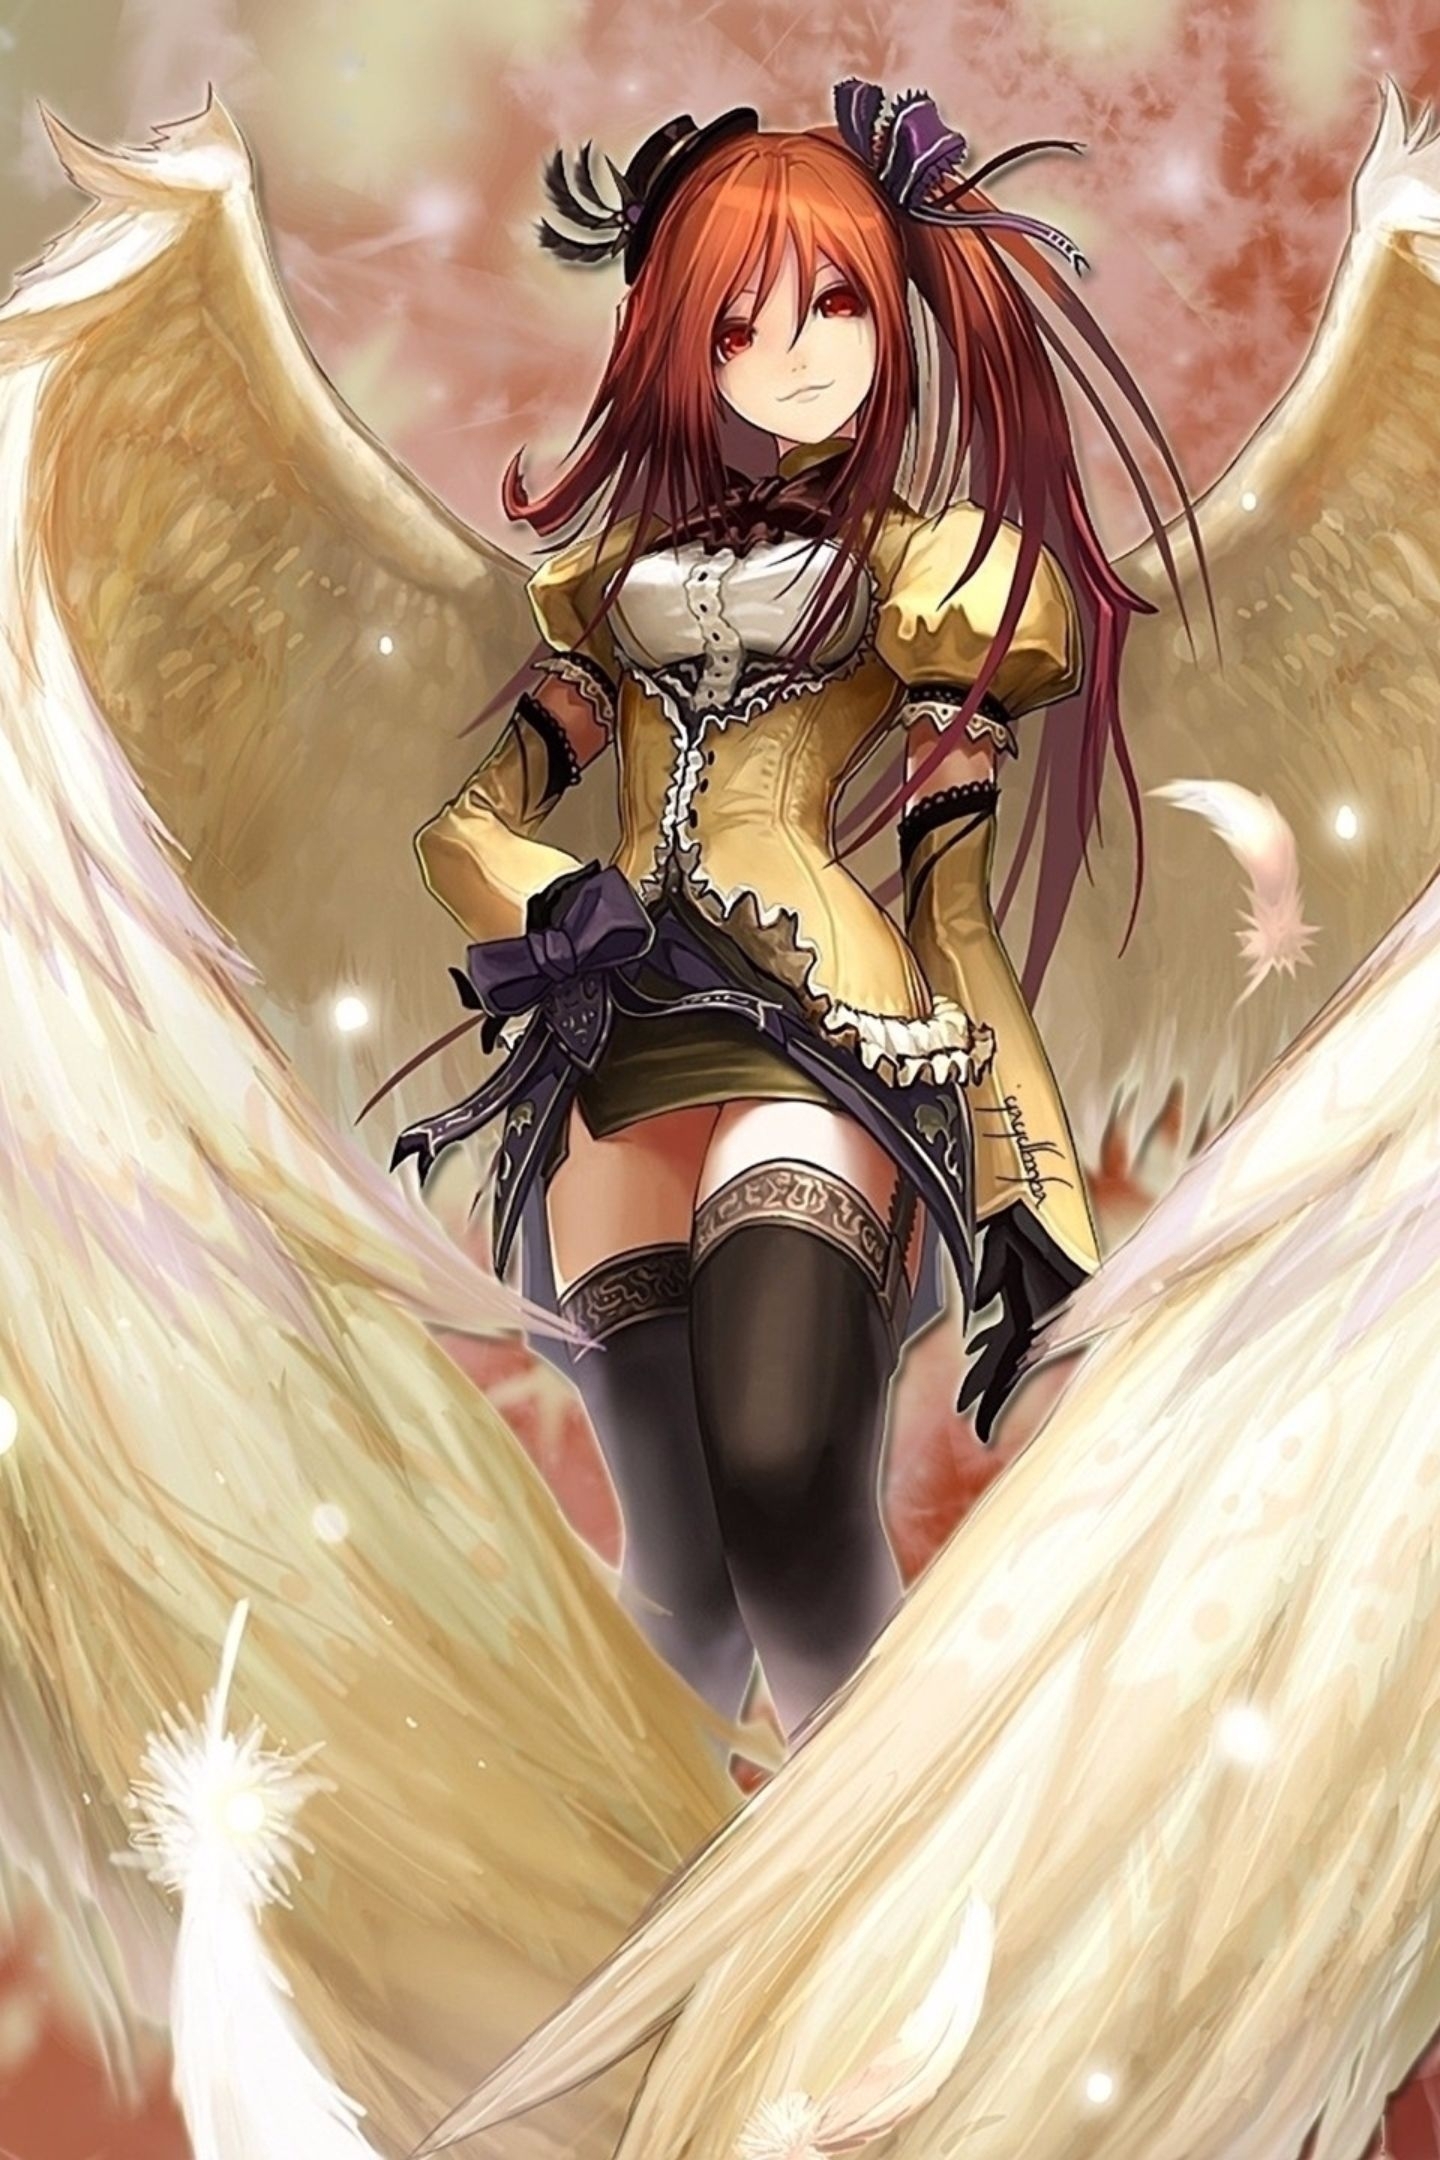 Image: Girl, red hair, wings, feathers, snowflakes, angel